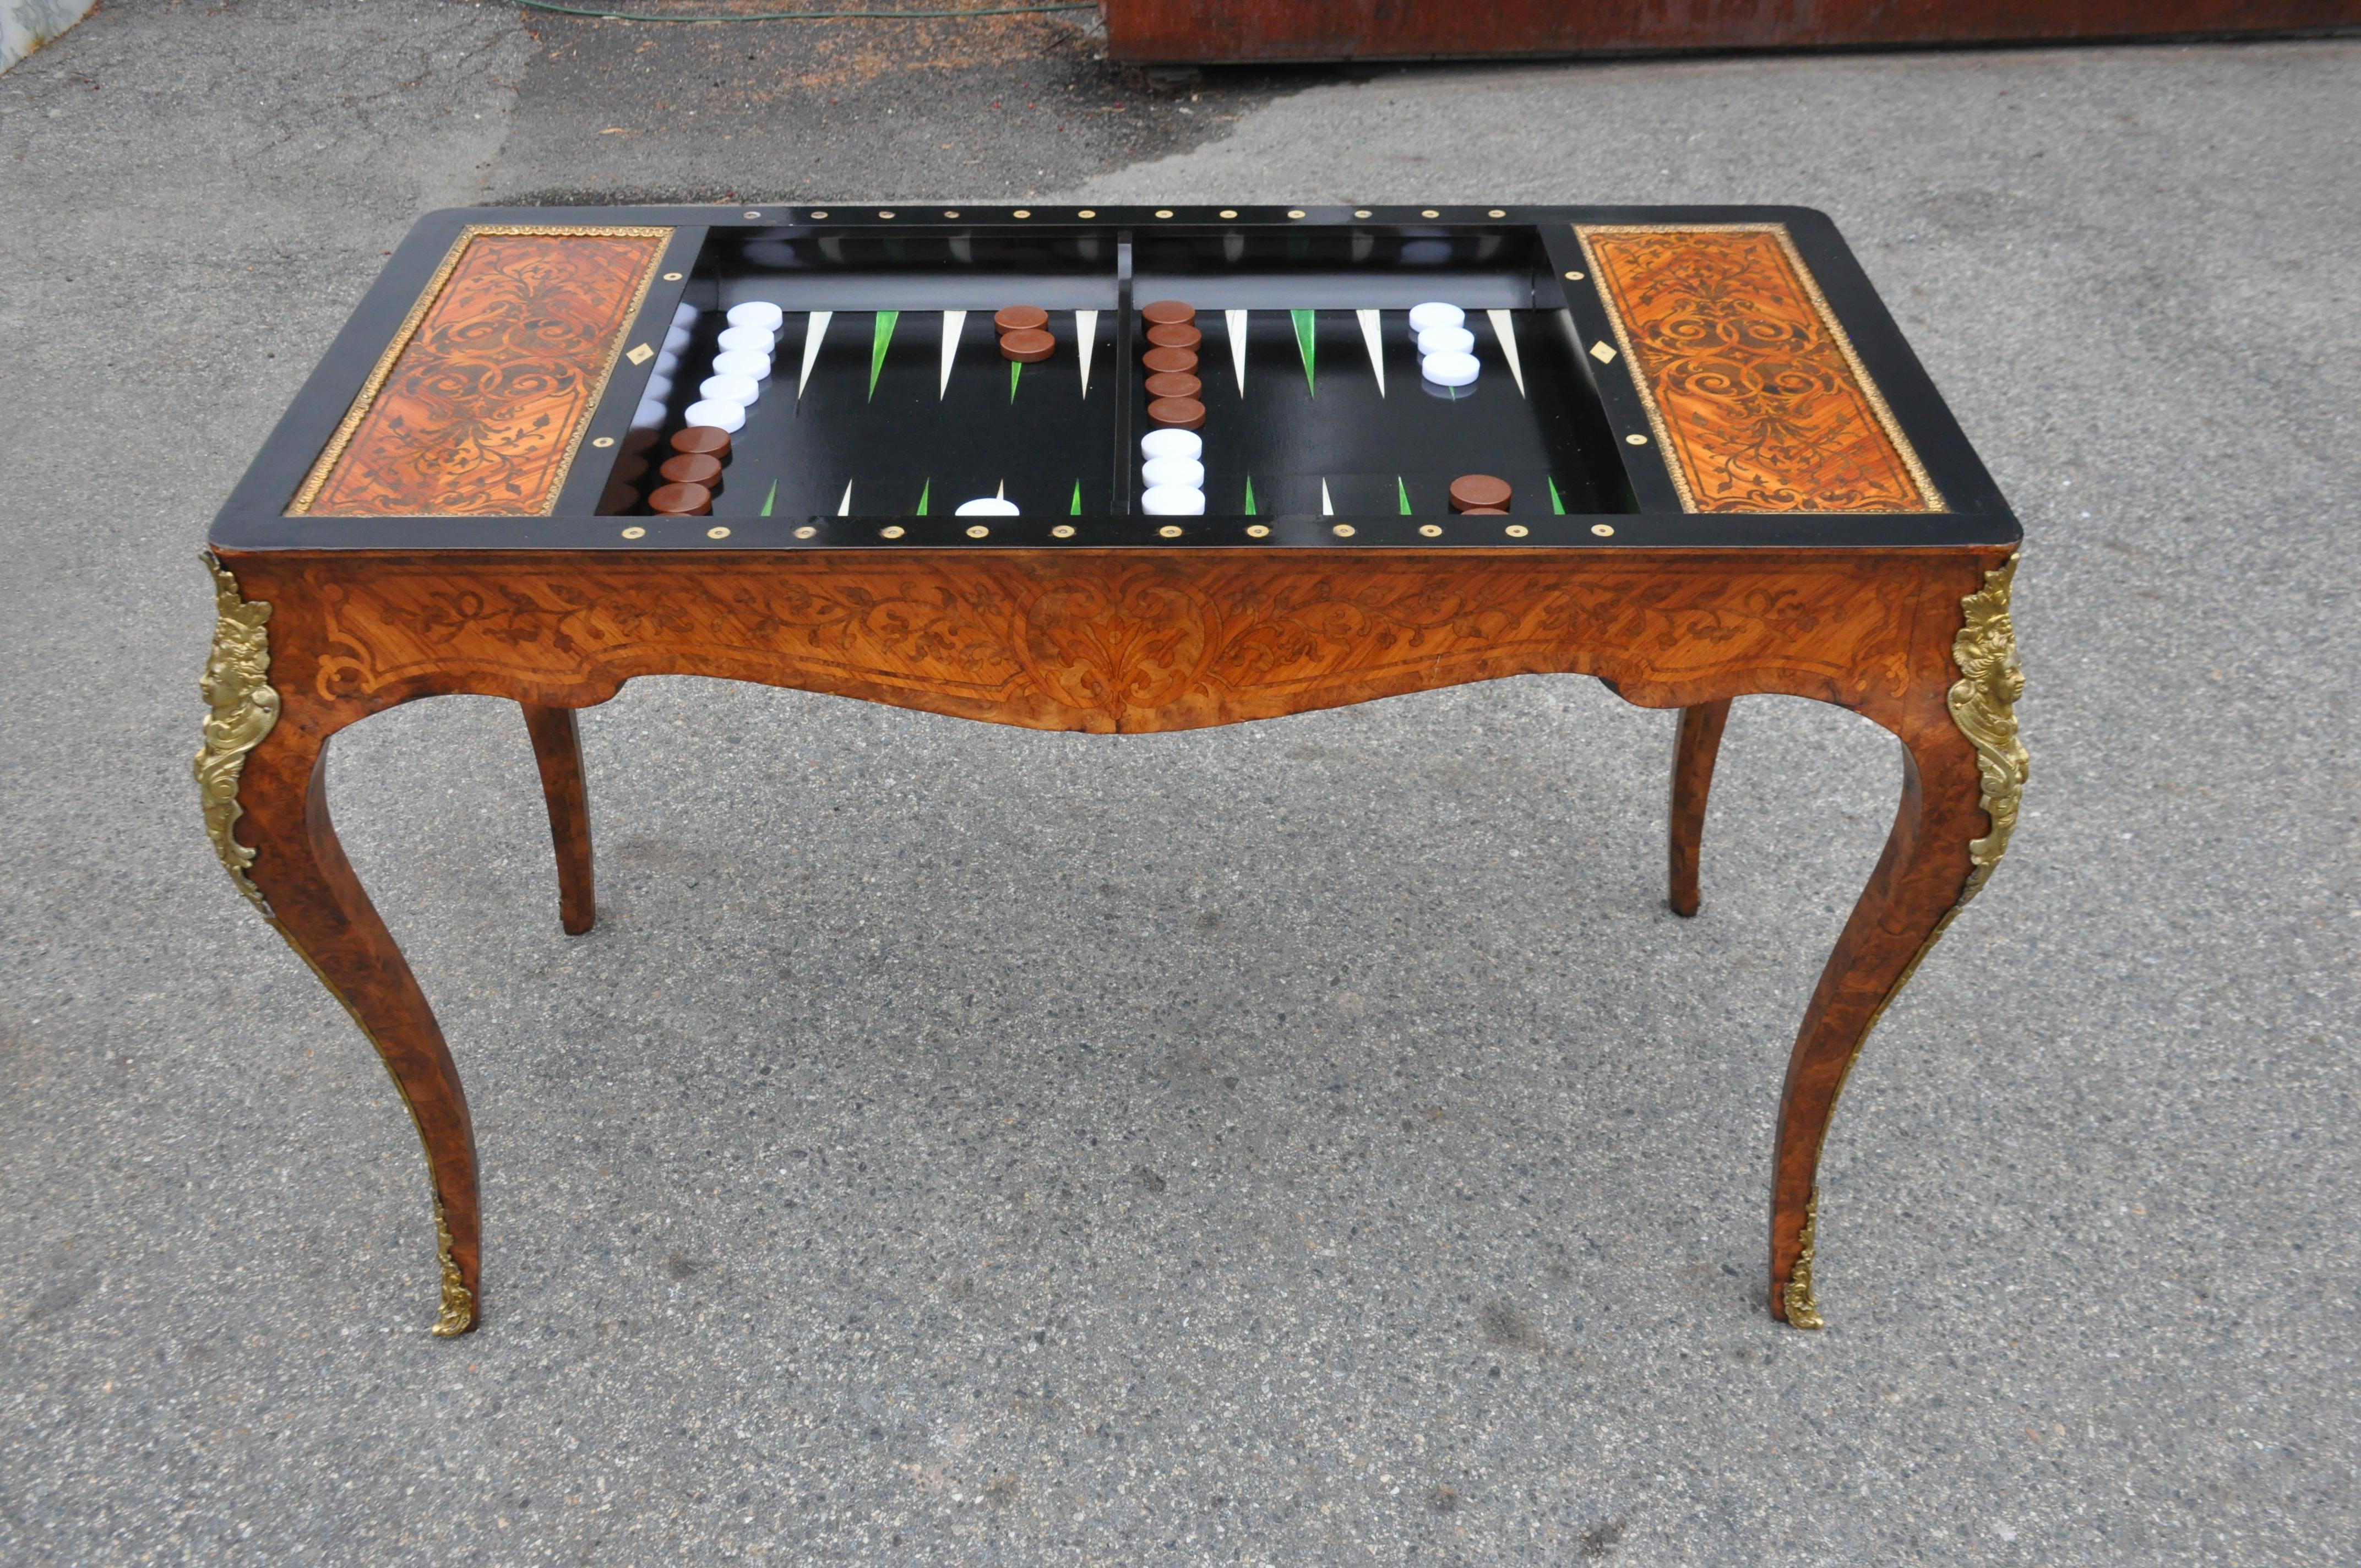 19th Century French Kingwood Regence Style Tric-Trac Games Table In Good Condition For Sale In Essex, MA